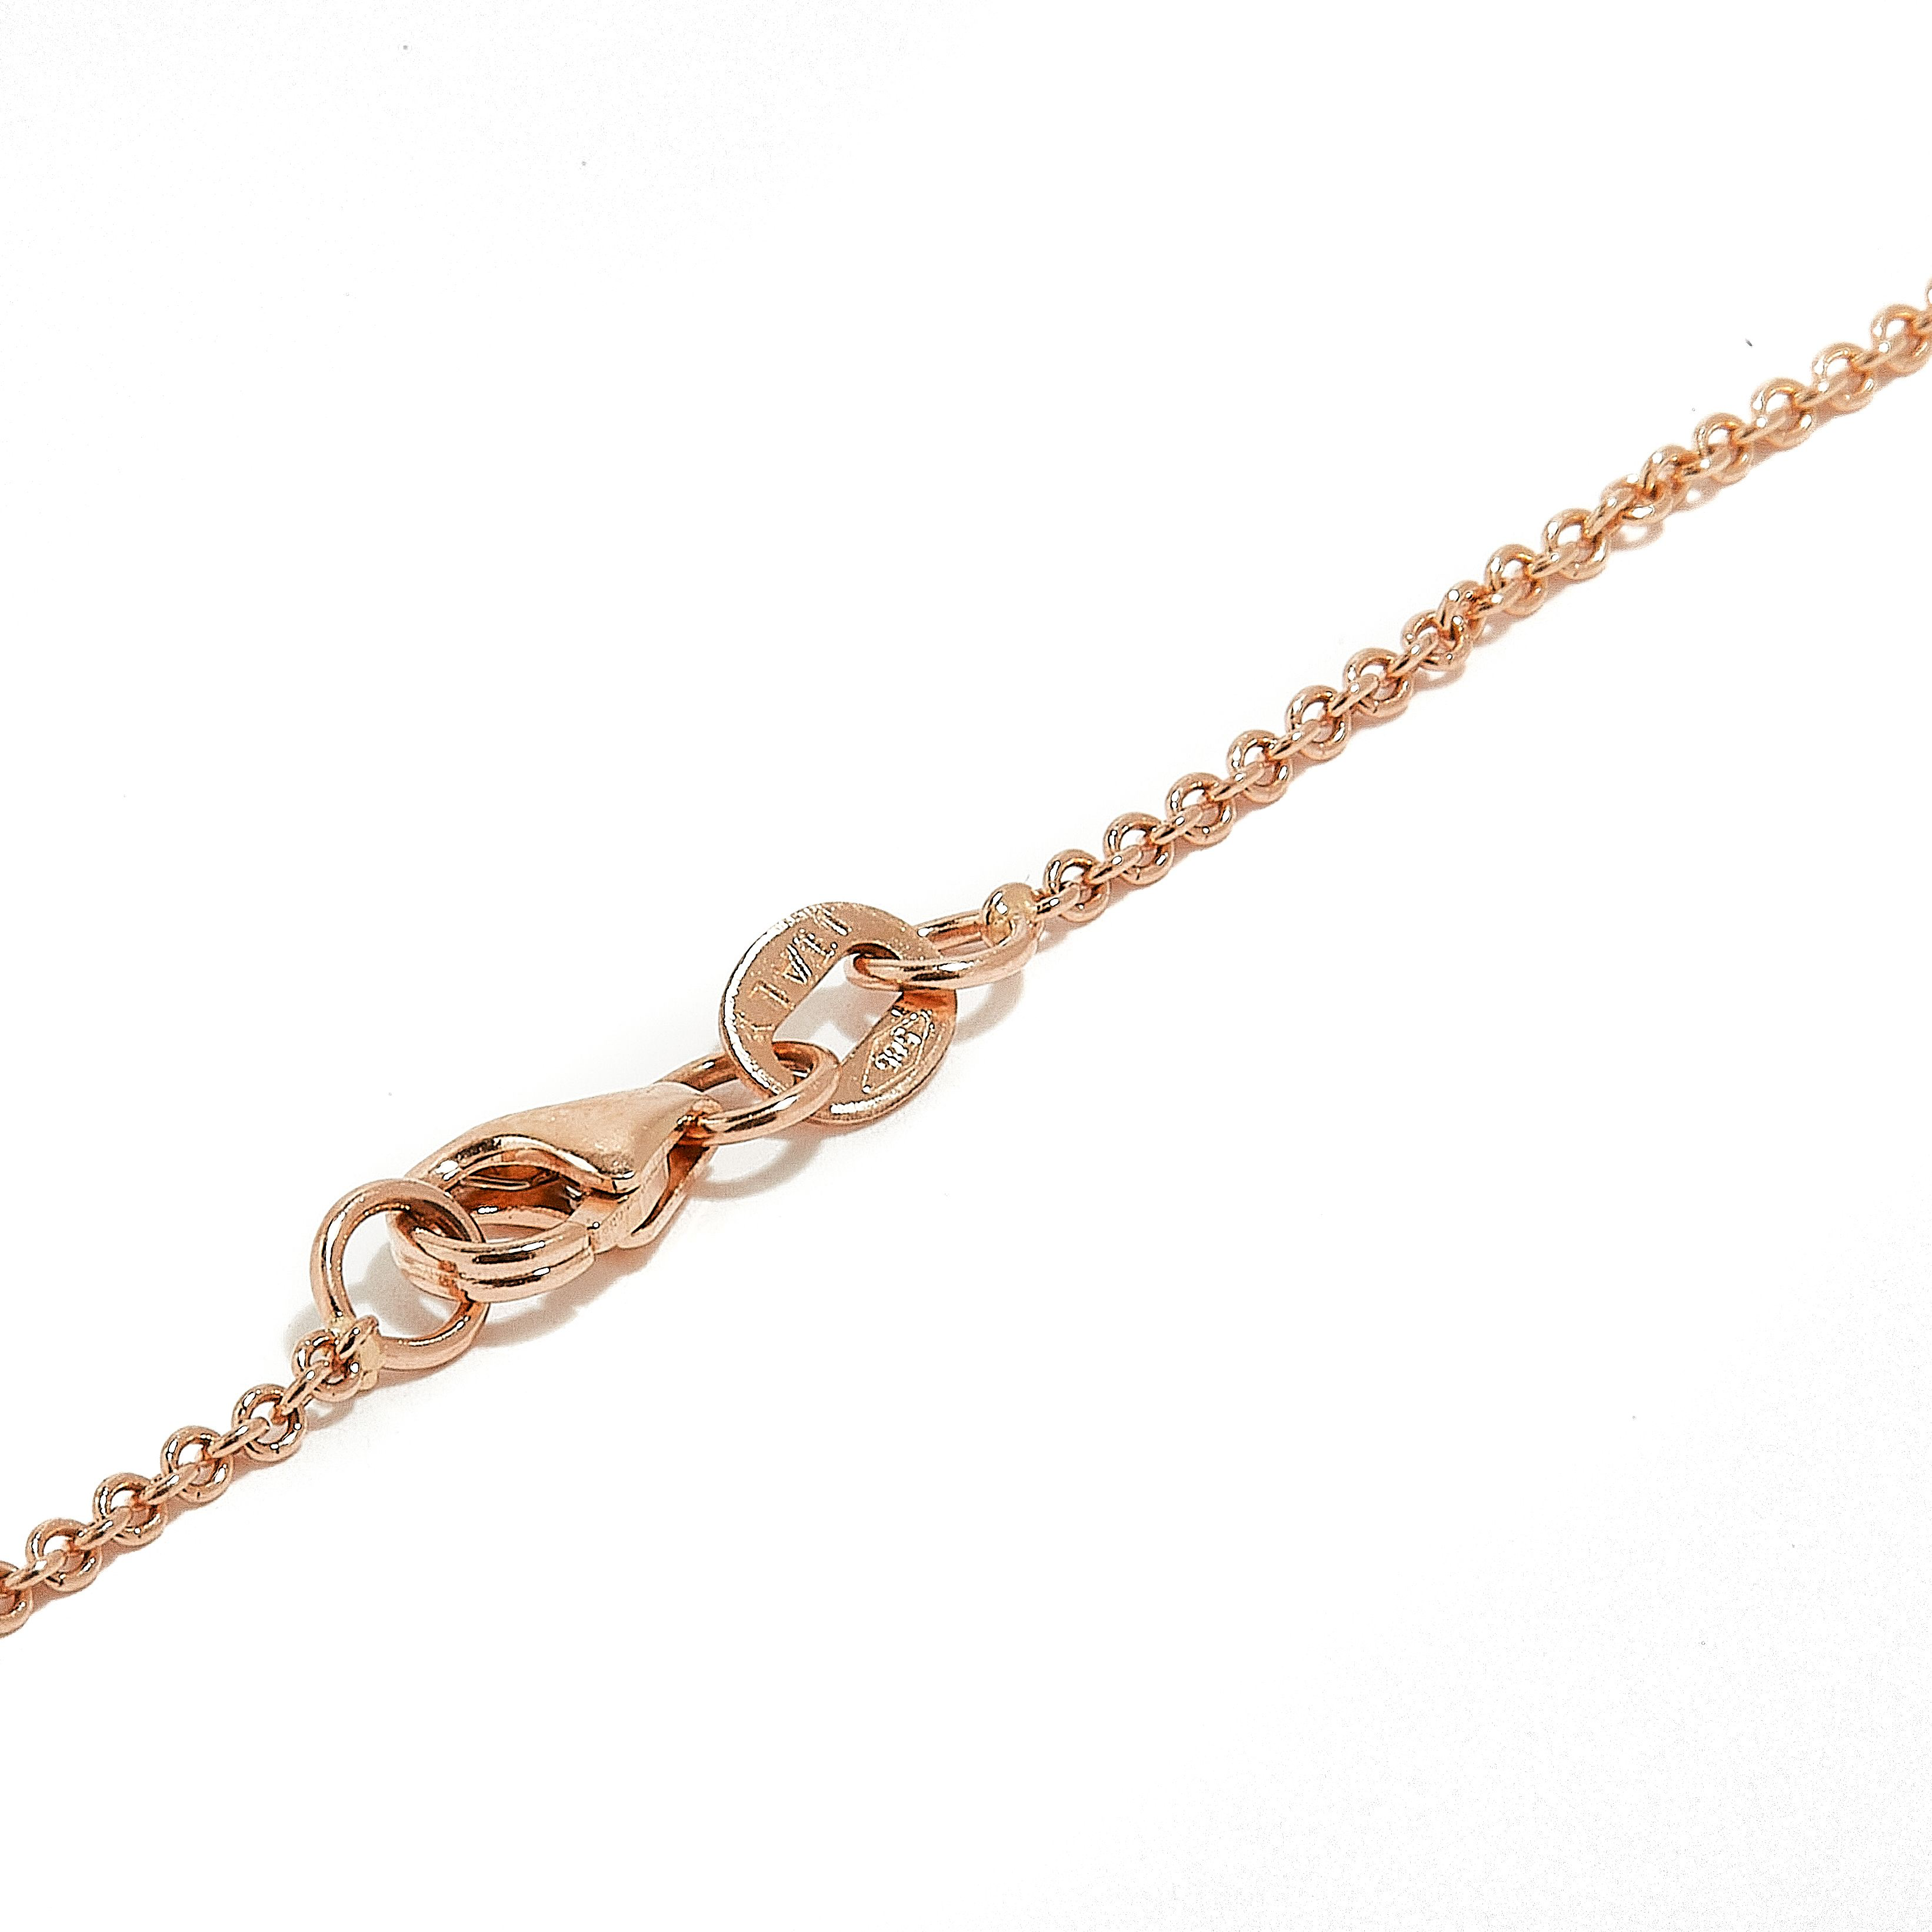 TURIN: ROSE GOLD MONTANA SAPPHIRE NECKLACE